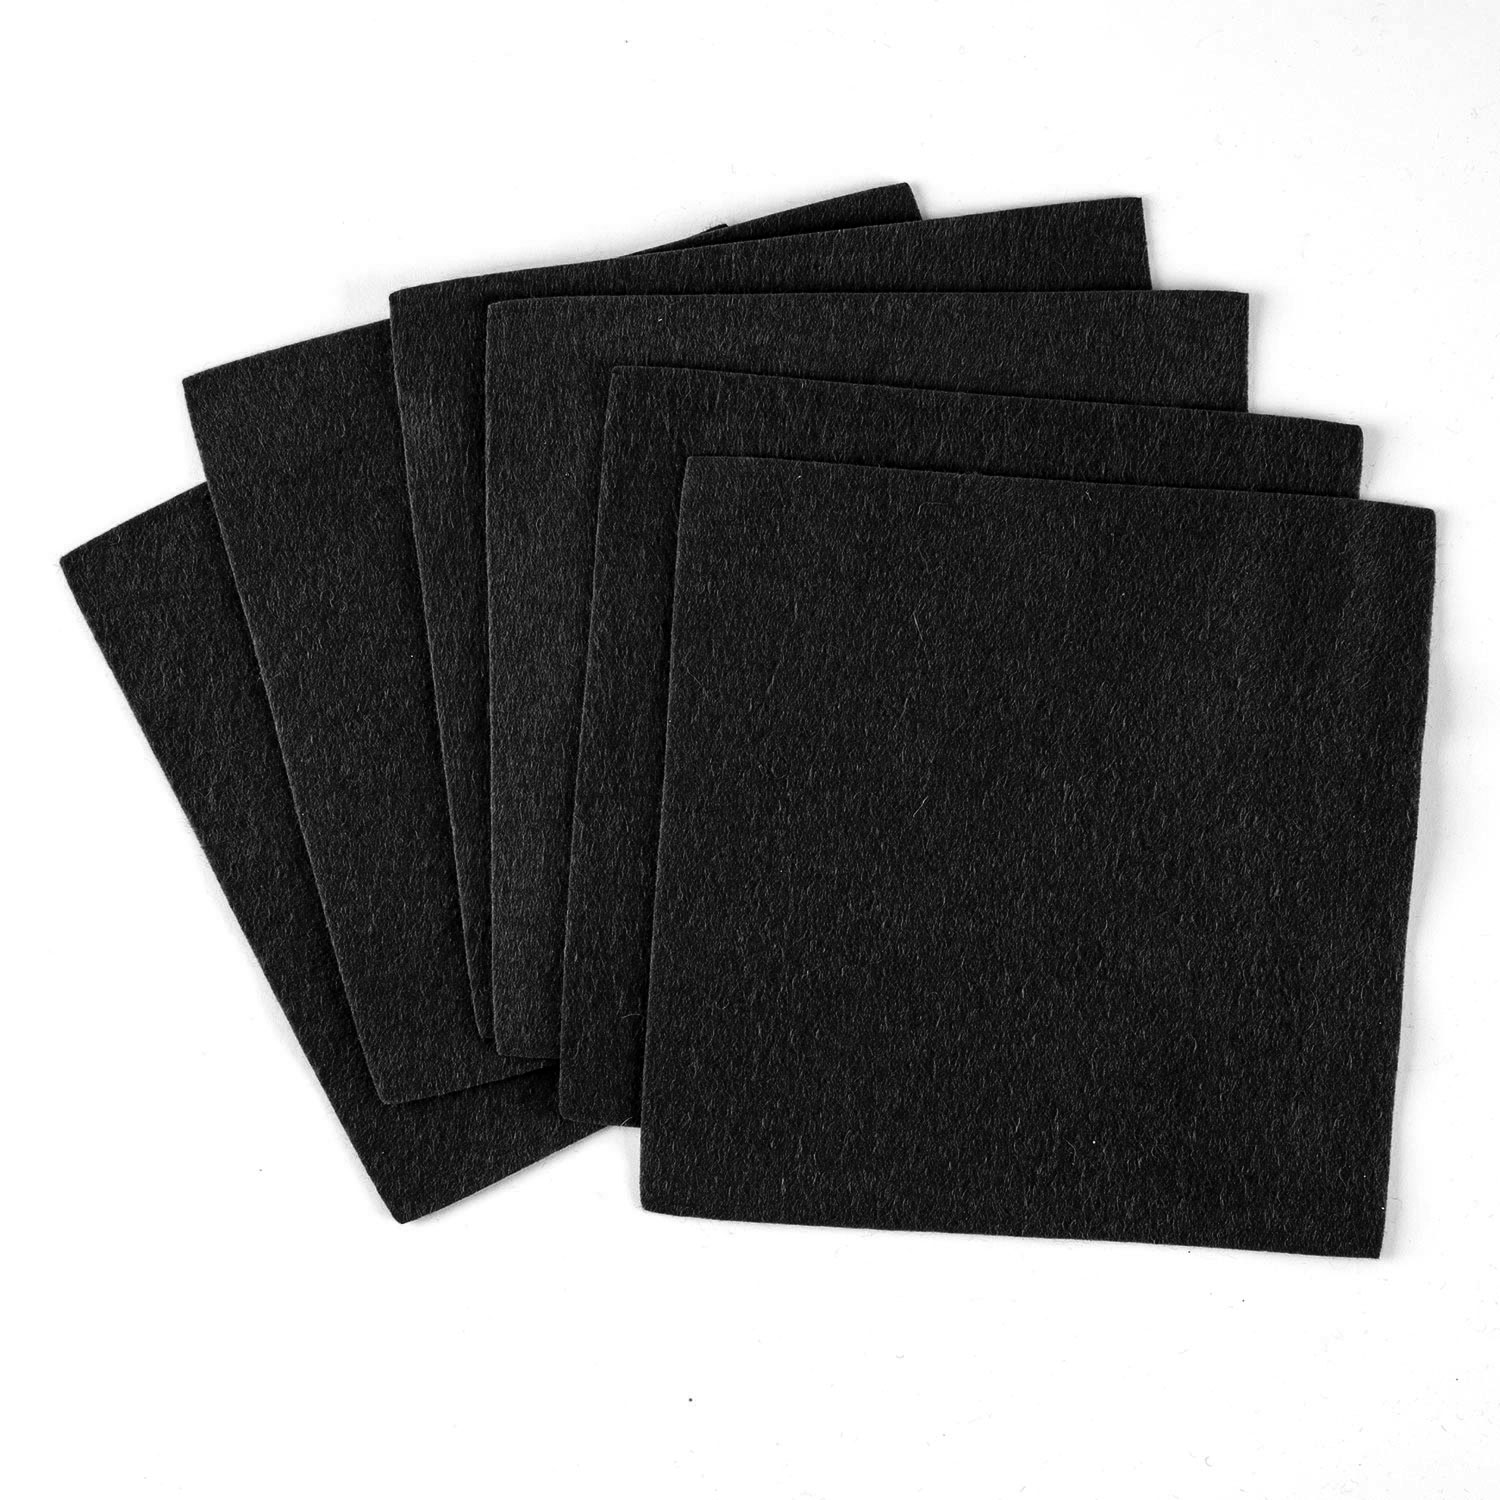 Felt by Clarity Pack of 6 Tile Backers 6x6" Non Adhesive Felt Pick N Mix - Pick any 2 - Black